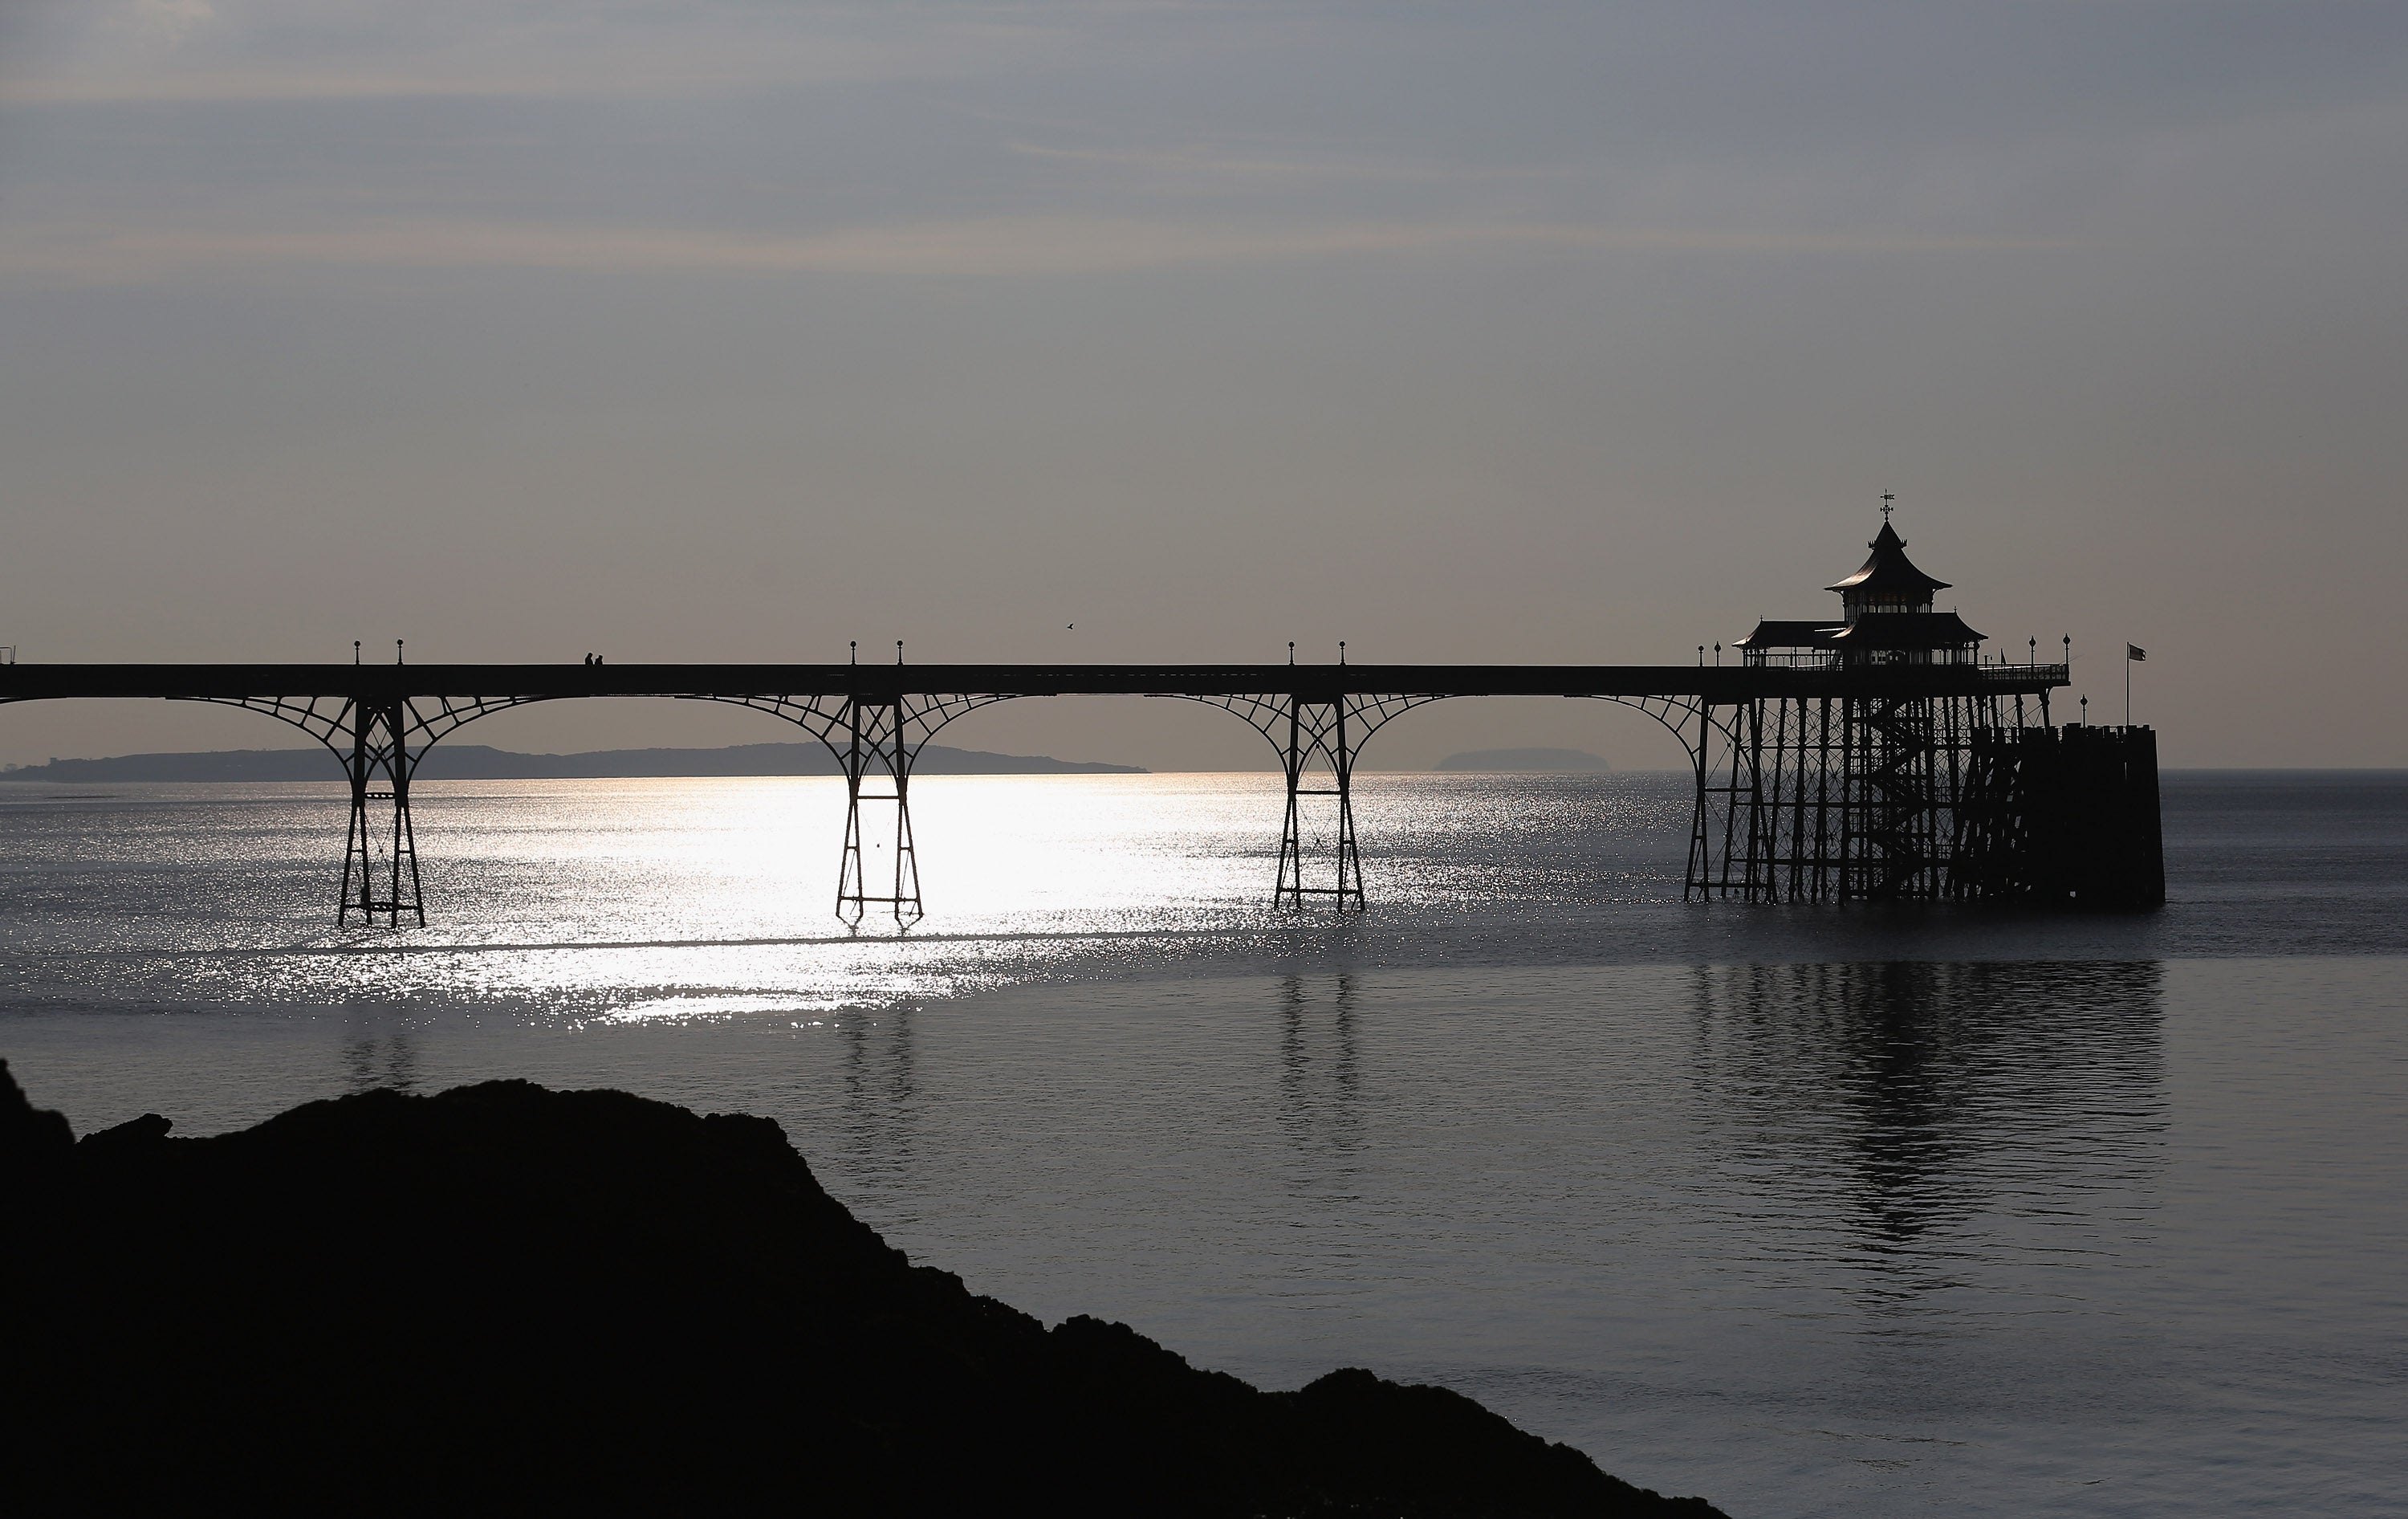 The sun reflects off the calm waters of the Severn Estuary at Clevedon